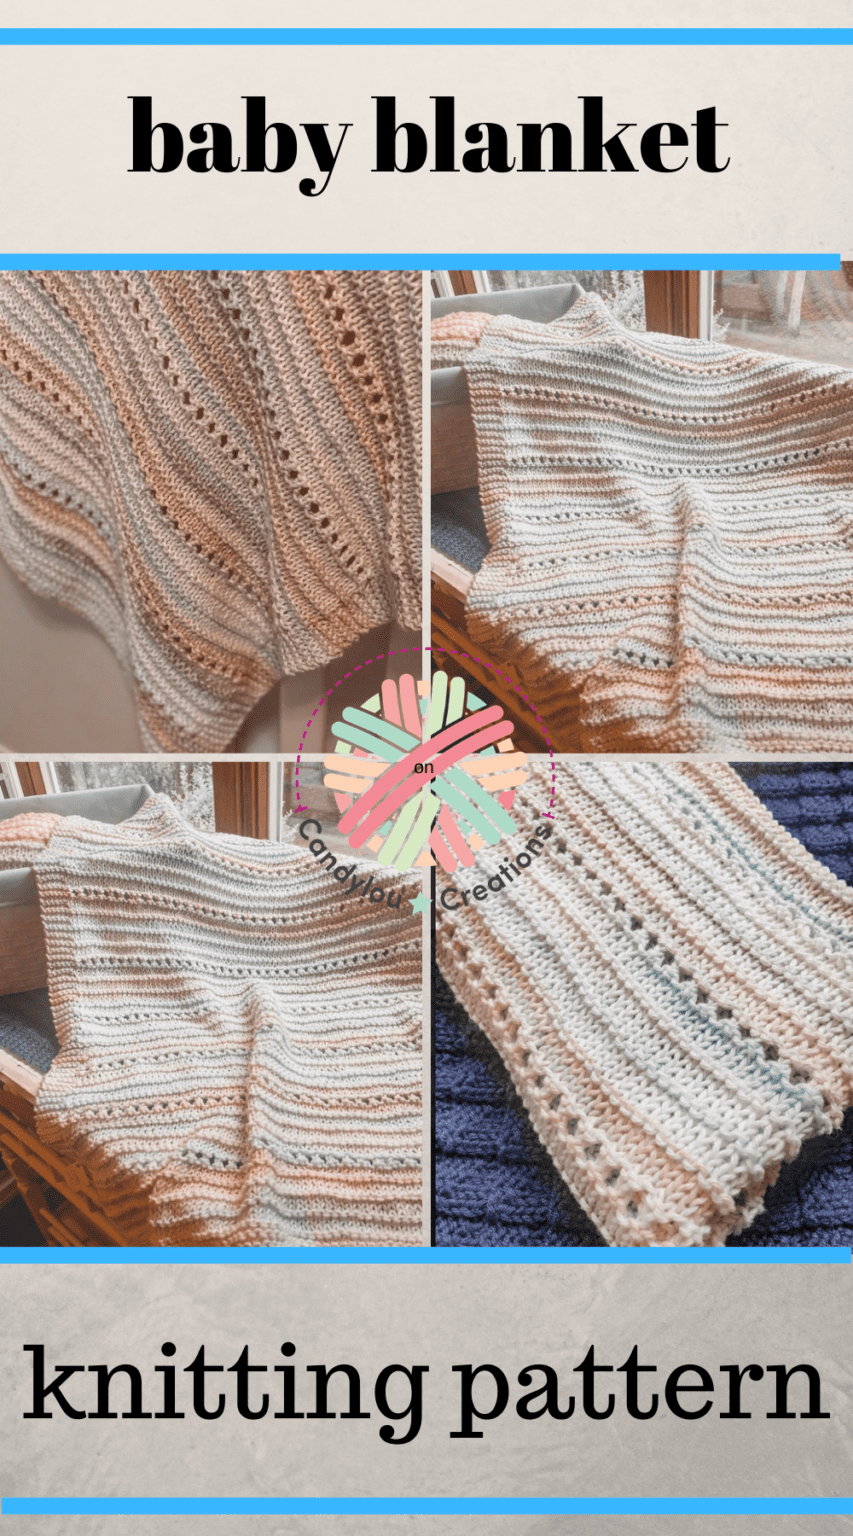 Baby Blanket Knitting Pattern: Cuddly Soft Baby Blanket - candyloucreations